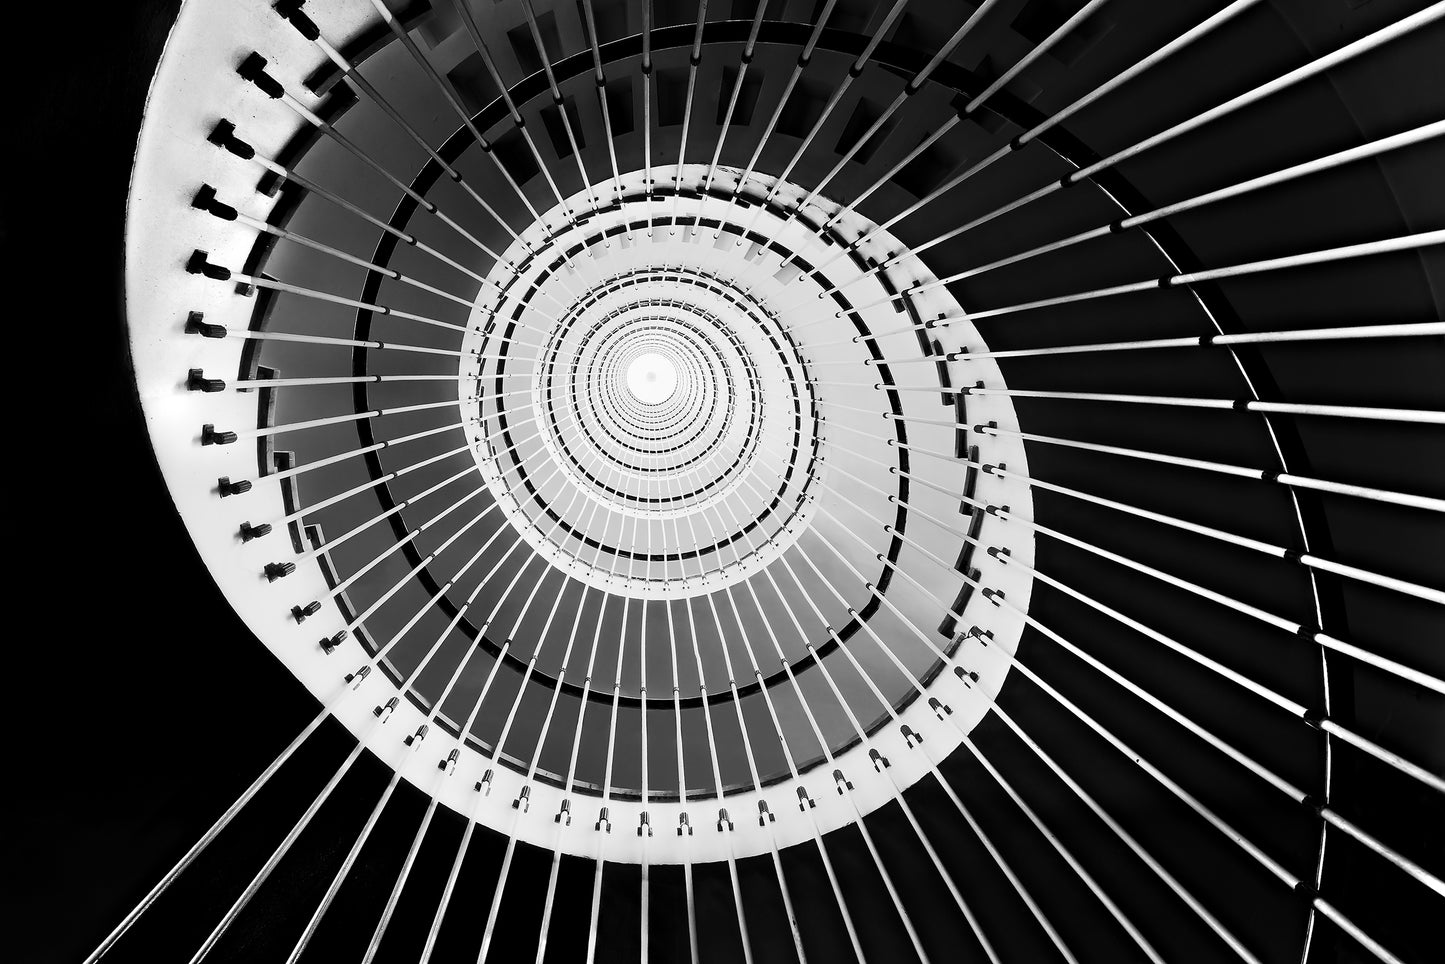 Never Ending Ascent - Equiangular Spiral Black And White Architectural Photograph Canvas Wall Art Print